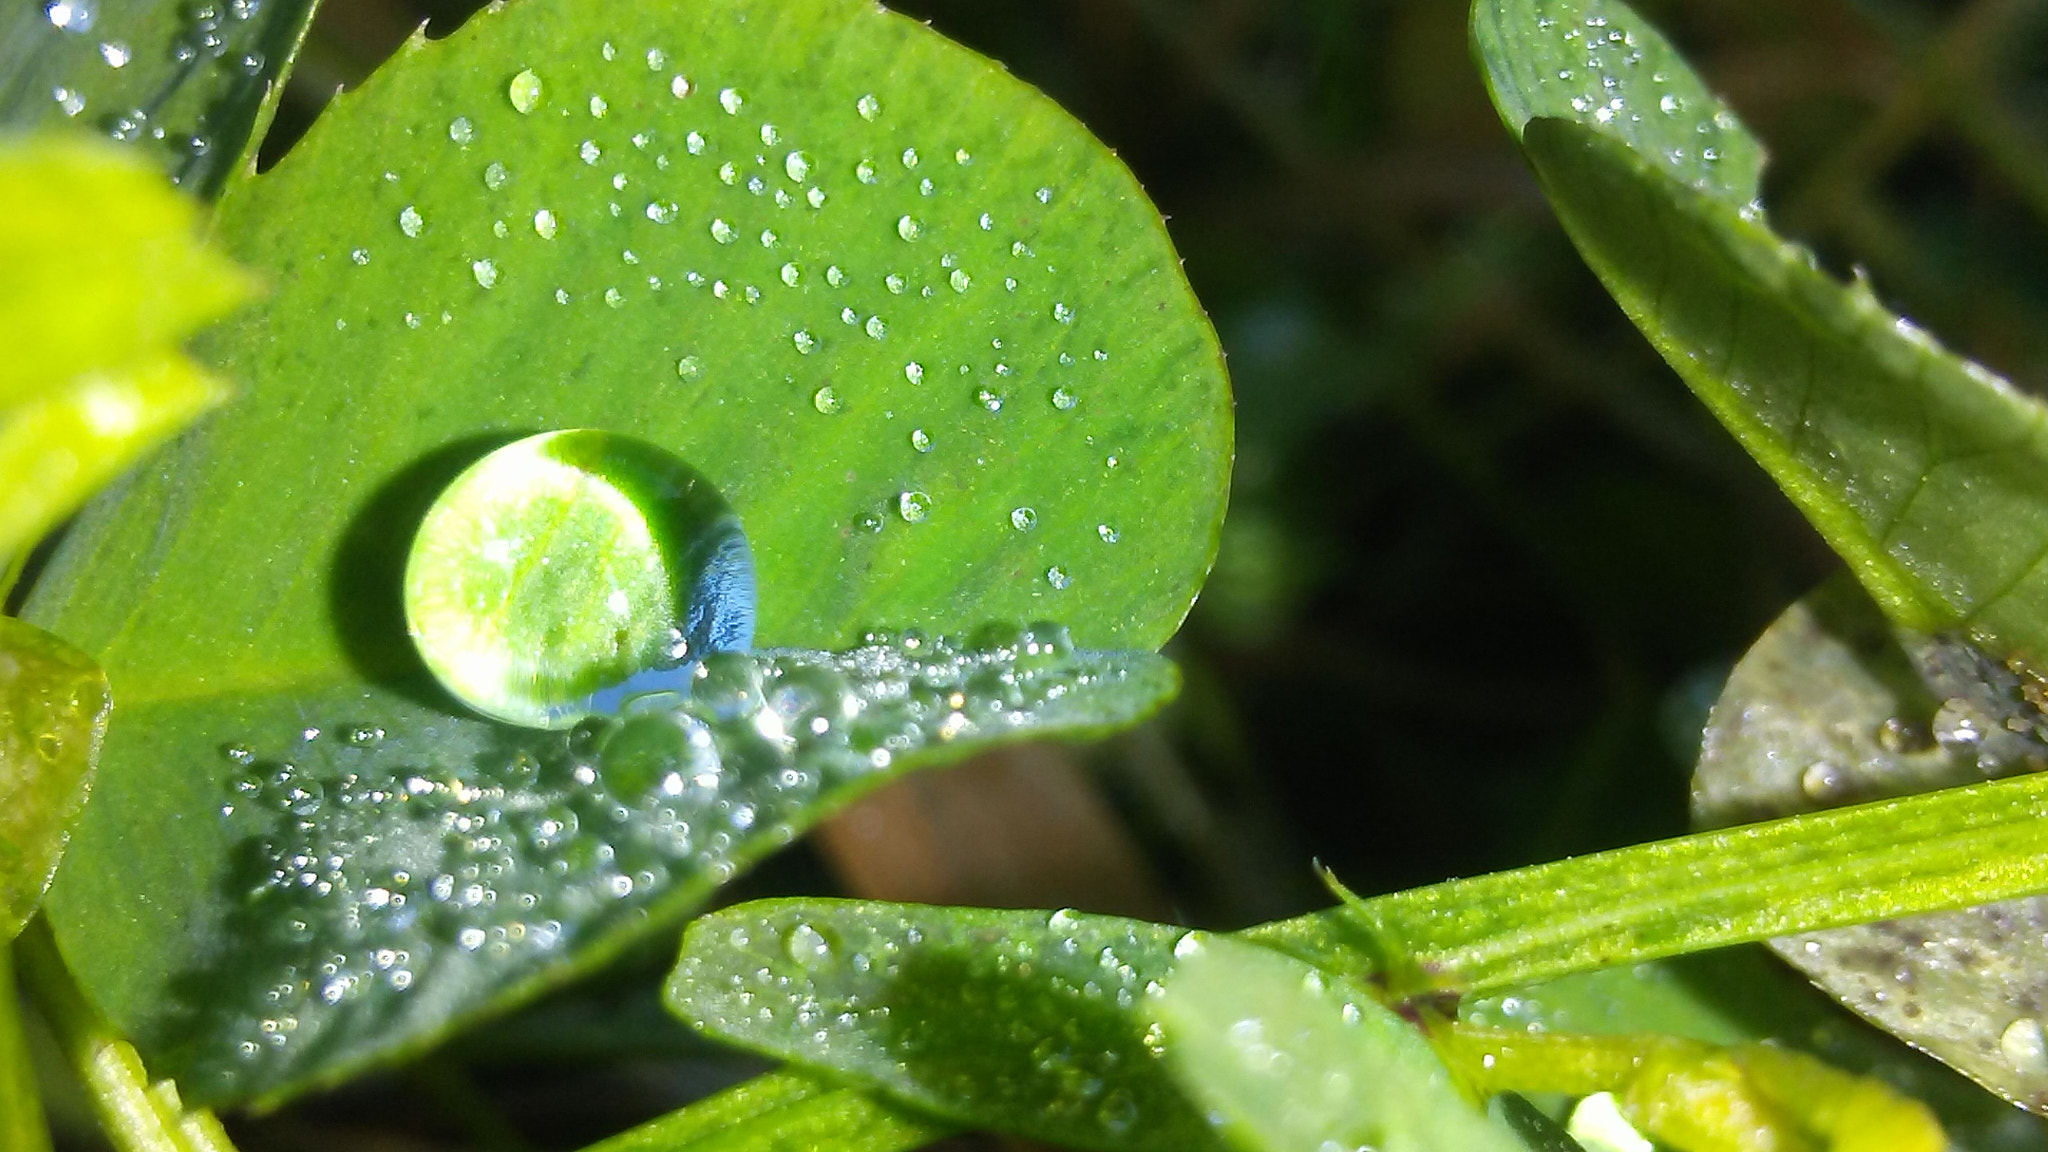 LG K4 sample photo. Drop of water on leaf photography